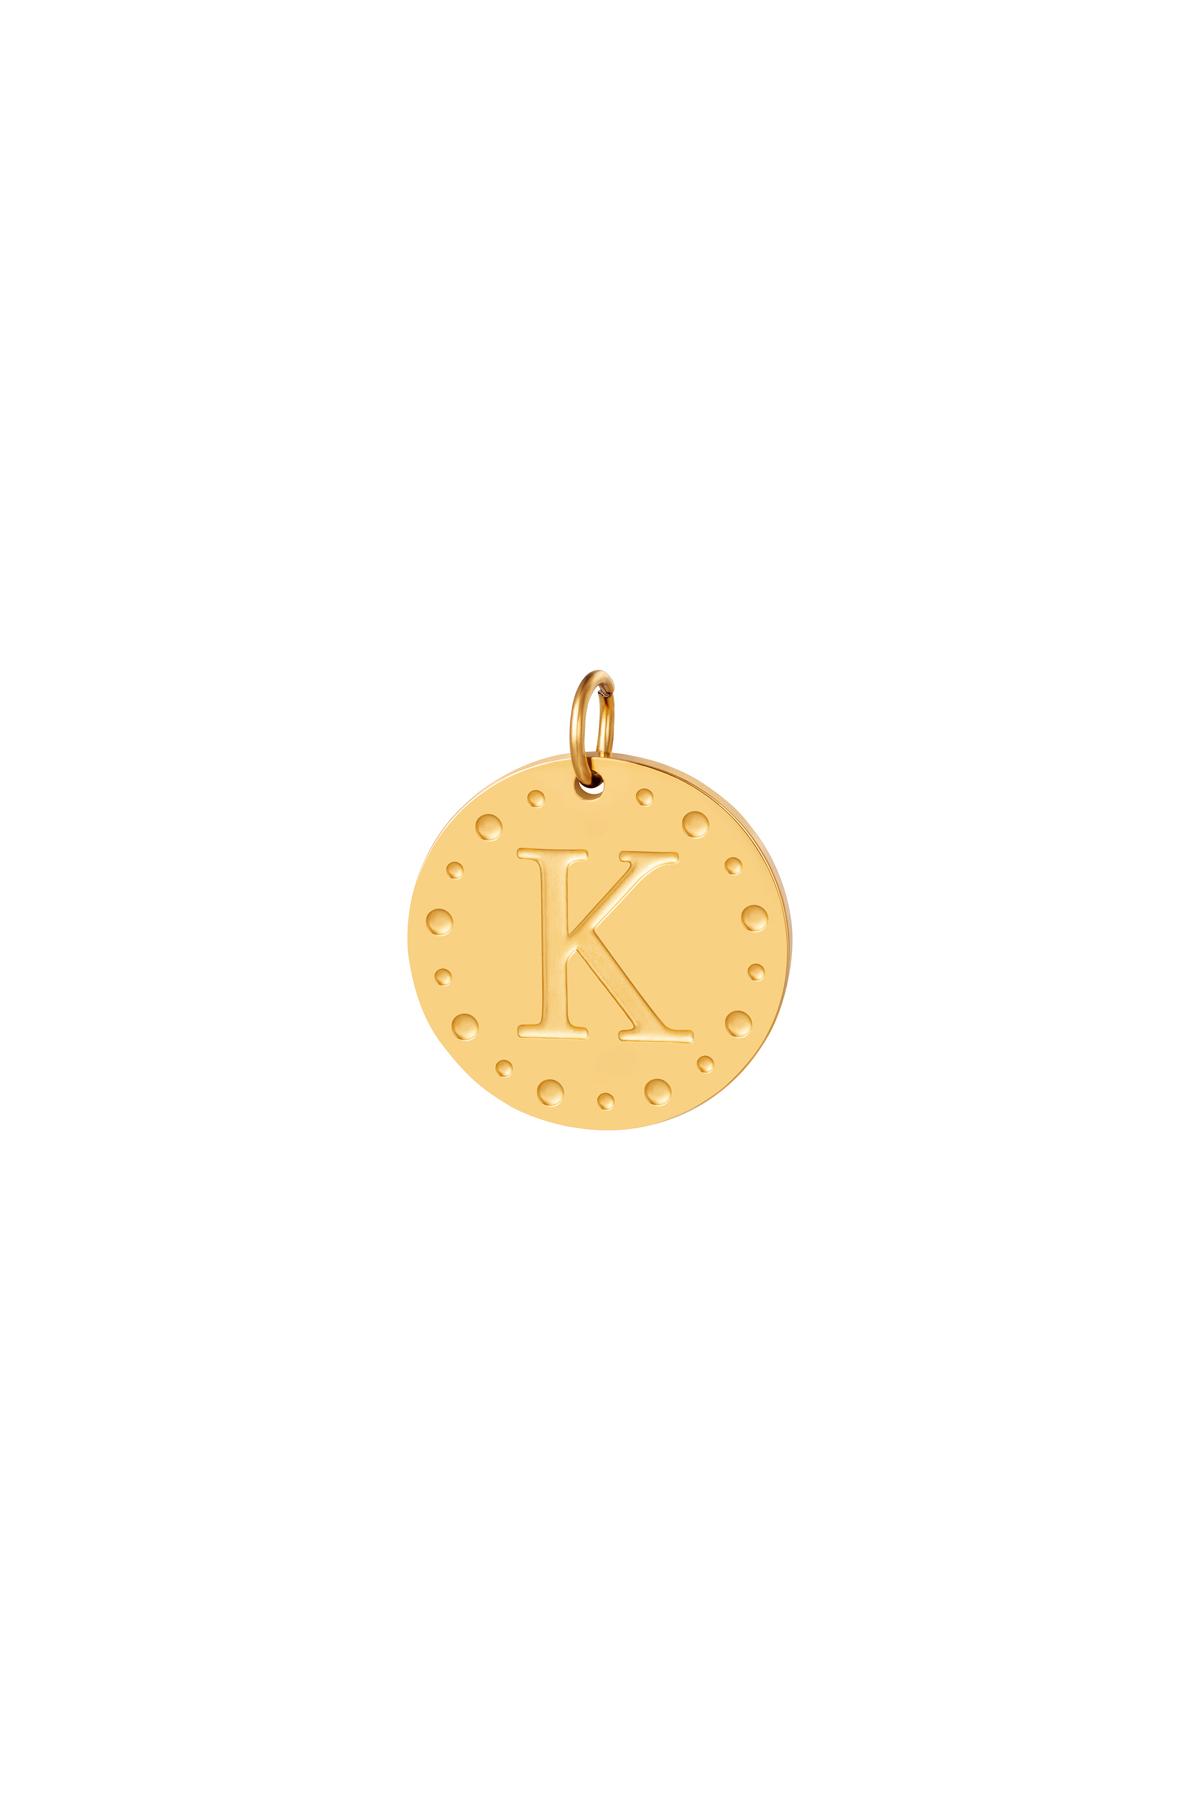 Charm cercle initial K Or Acier inoxydable